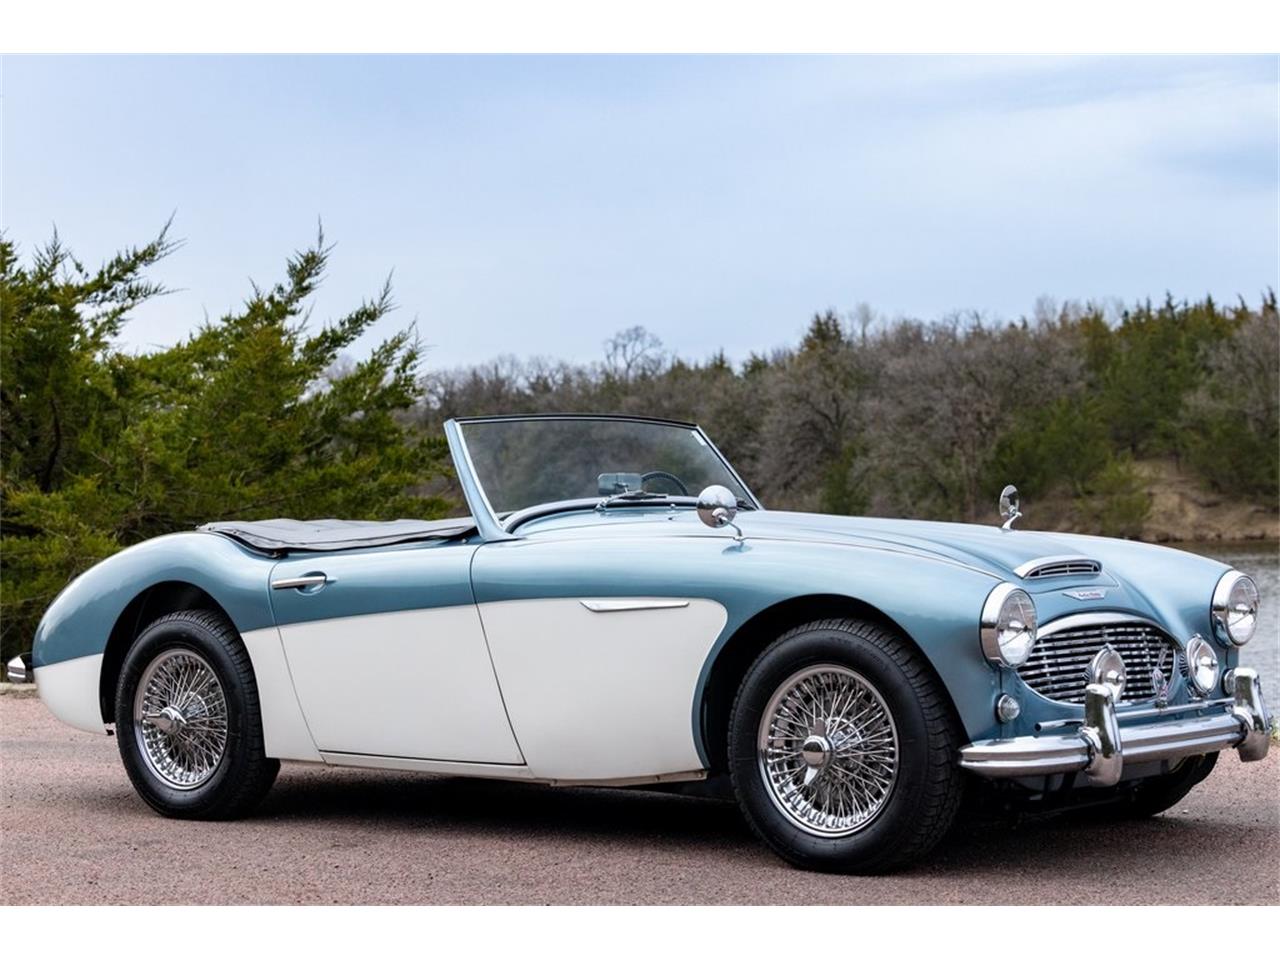 For Sale: 1957 Austin-Healey 100-6 in Sioux Falls, South Dakota for sale in Sioux Falls, SD